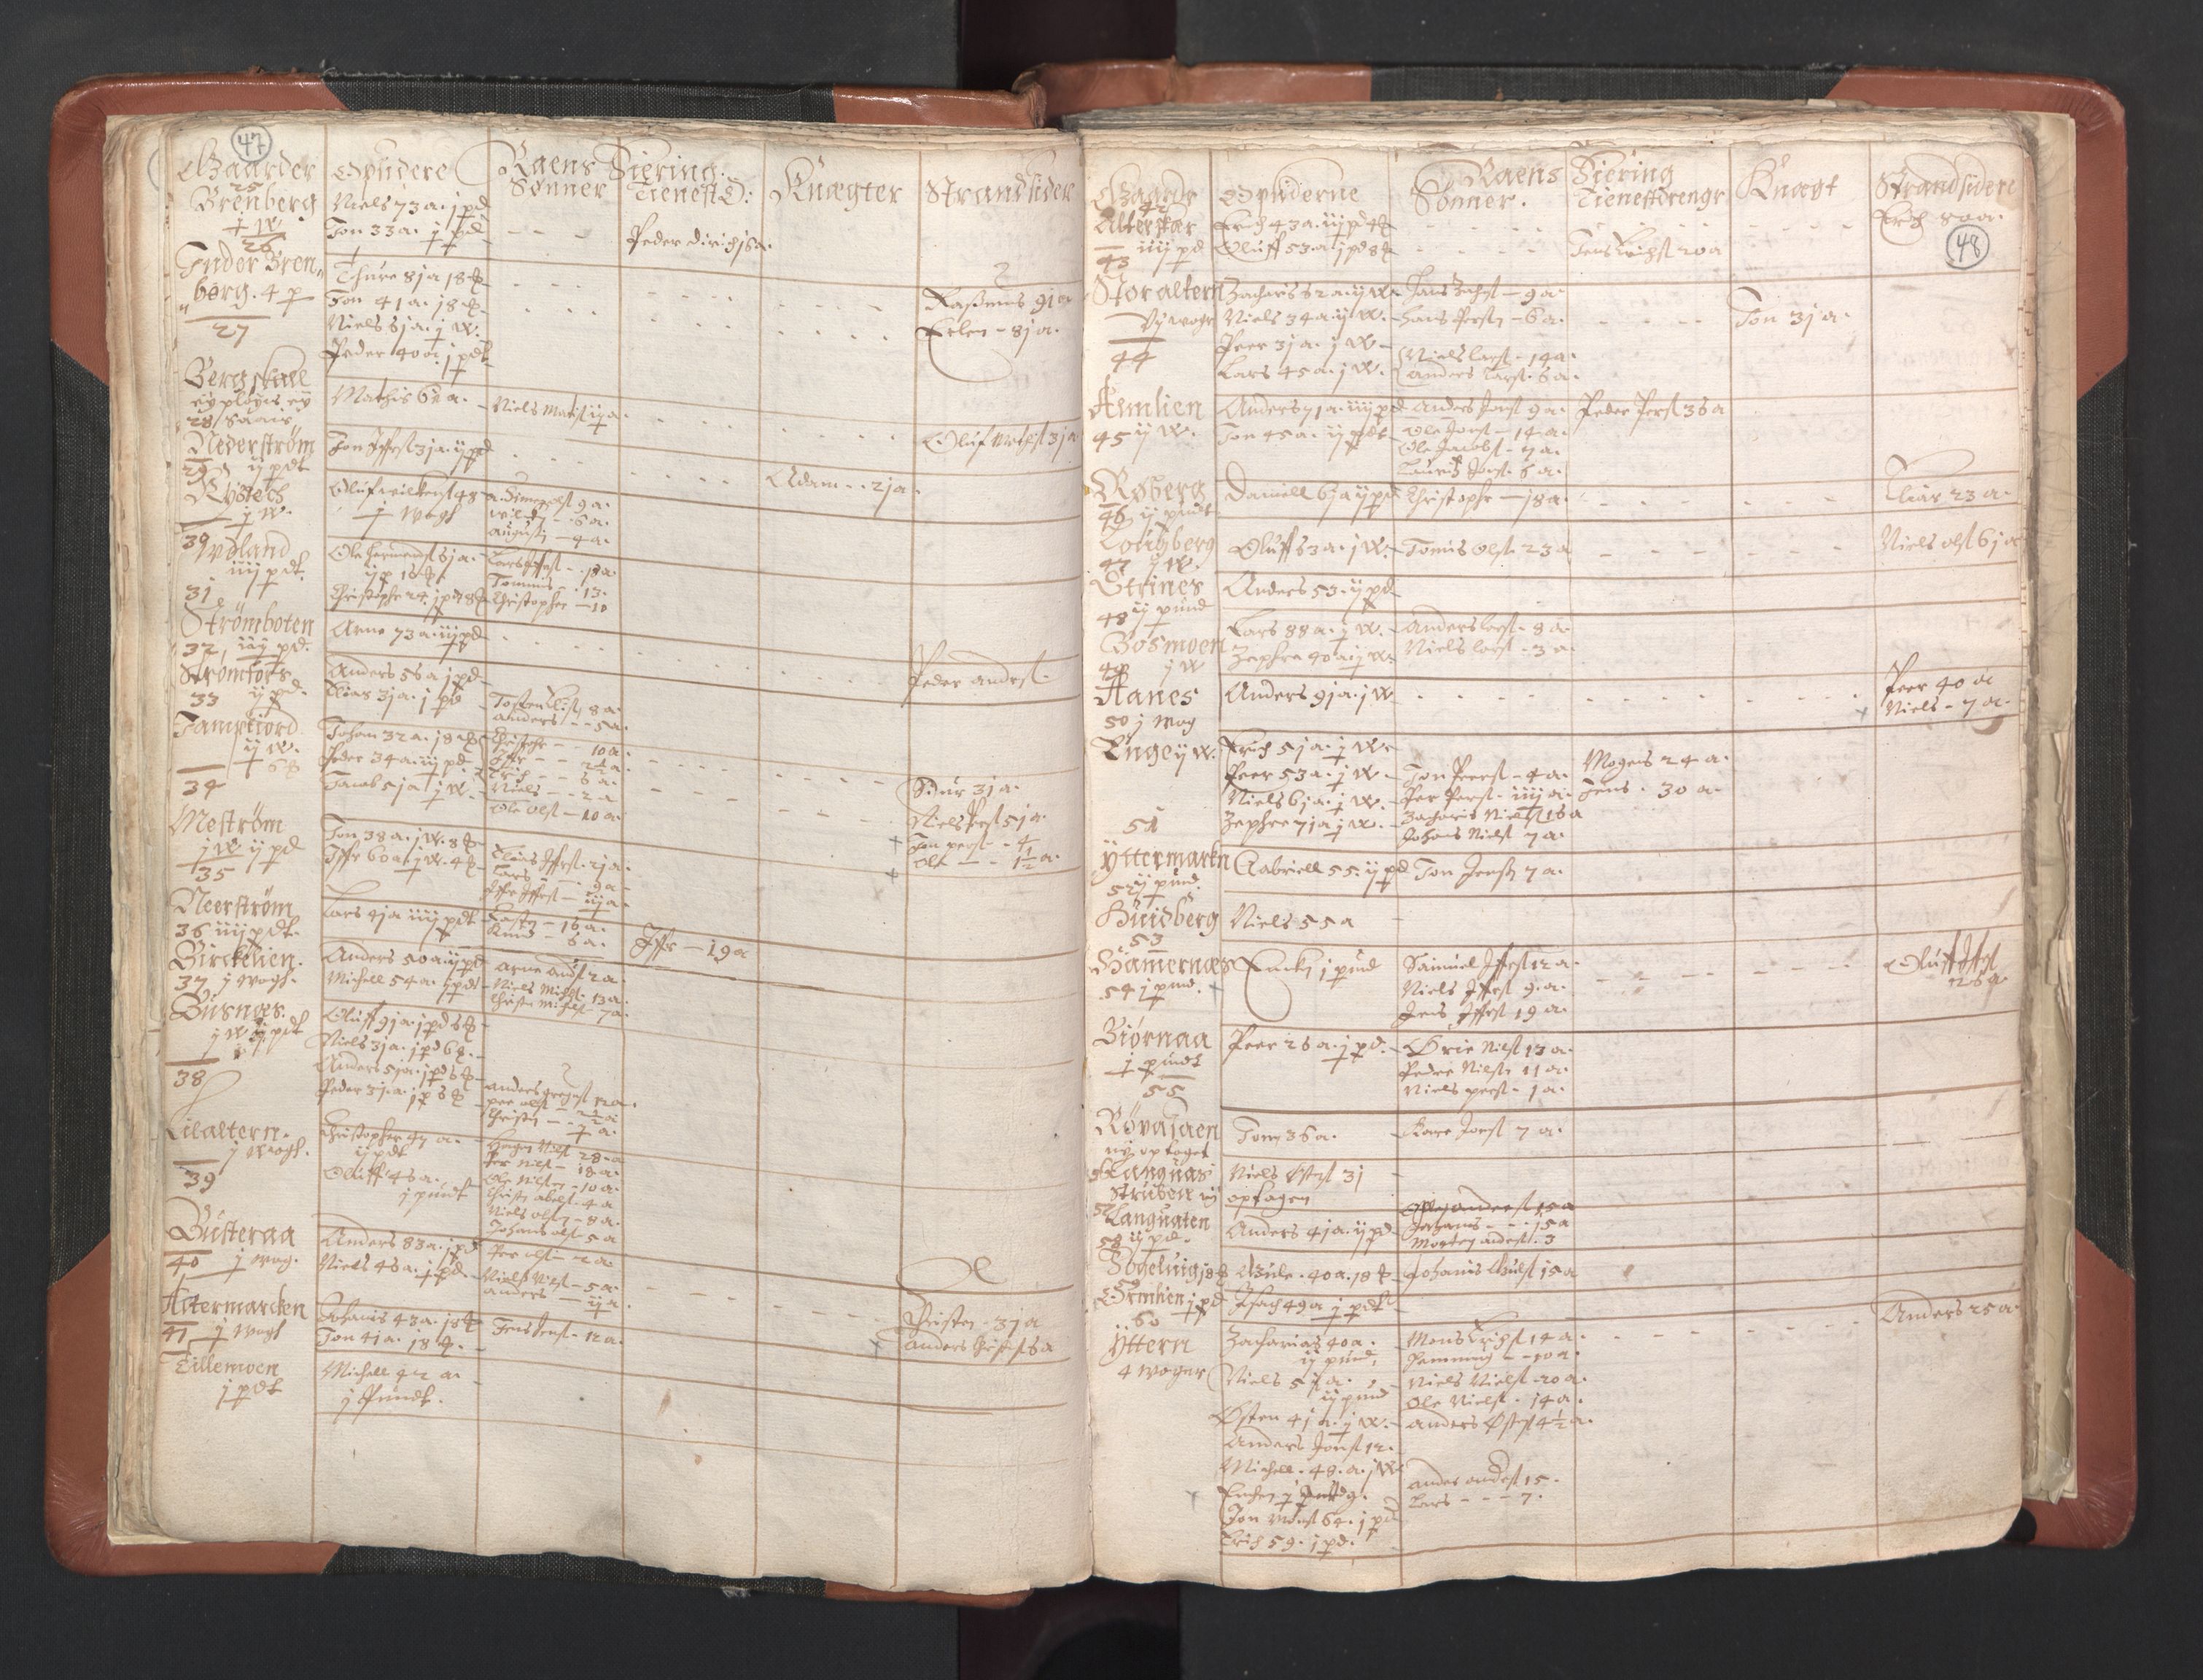 RA, Vicar's Census 1664-1666, no. 35: Helgeland deanery and Salten deanery, 1664-1666, p. 47-48